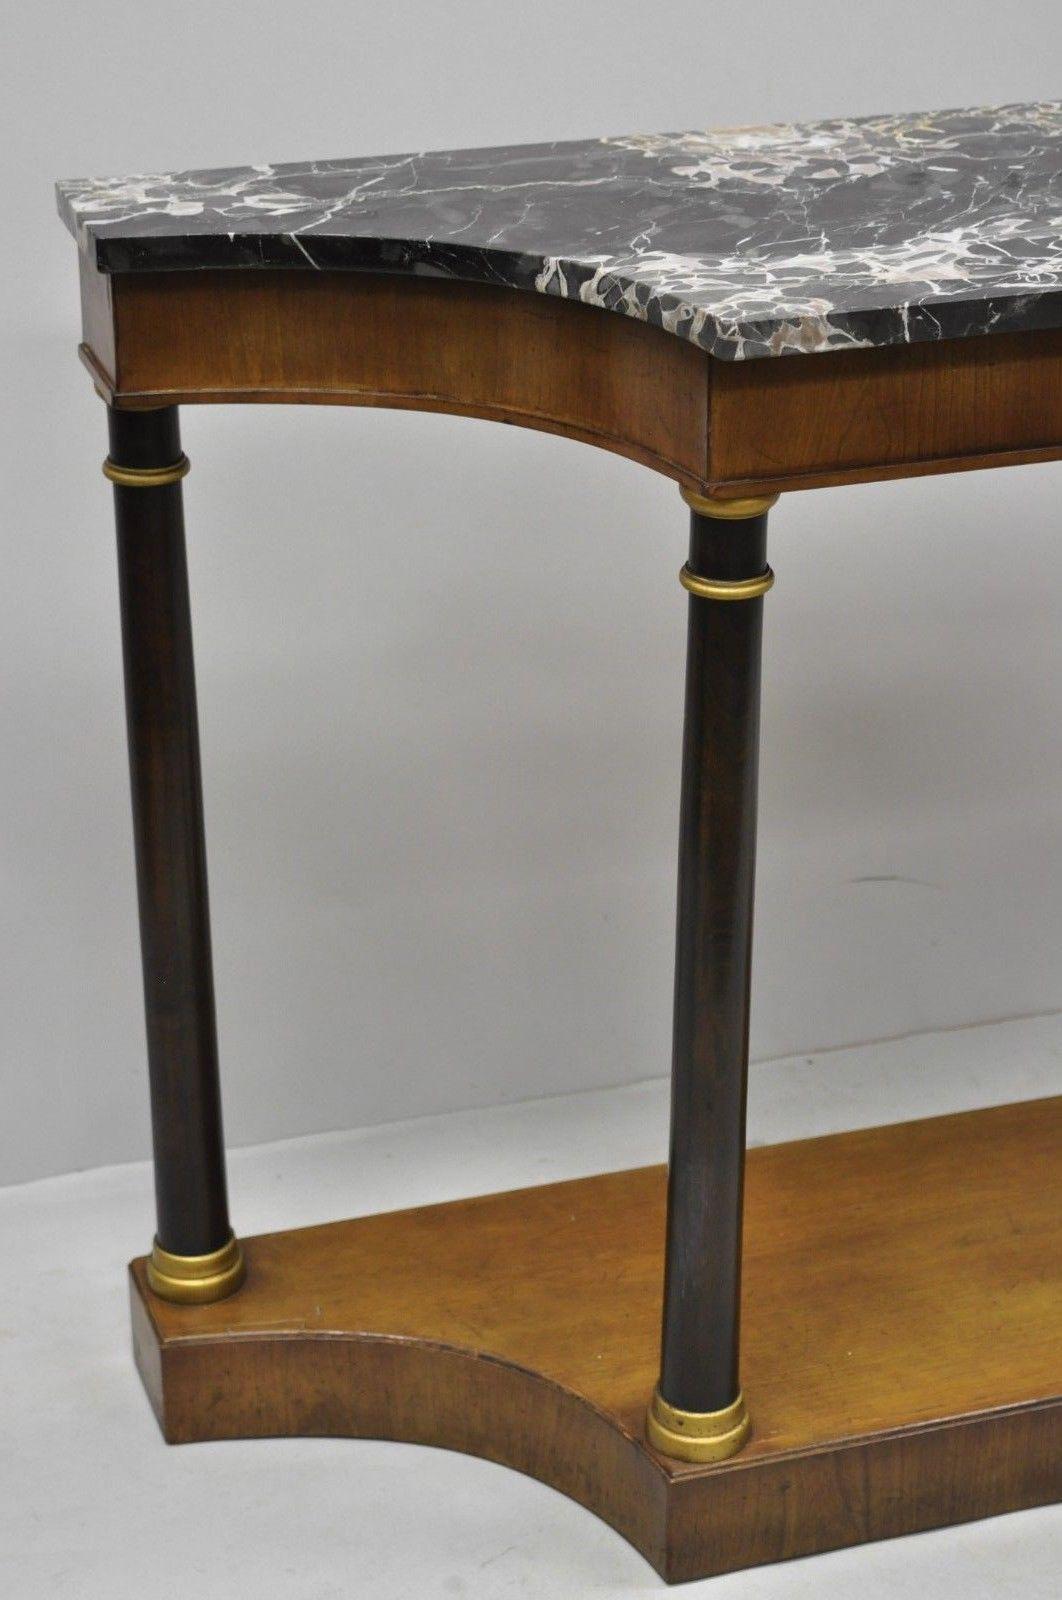 American French Empire Style Marble Top Console Hall Table with Columns by Fine Arts Furn